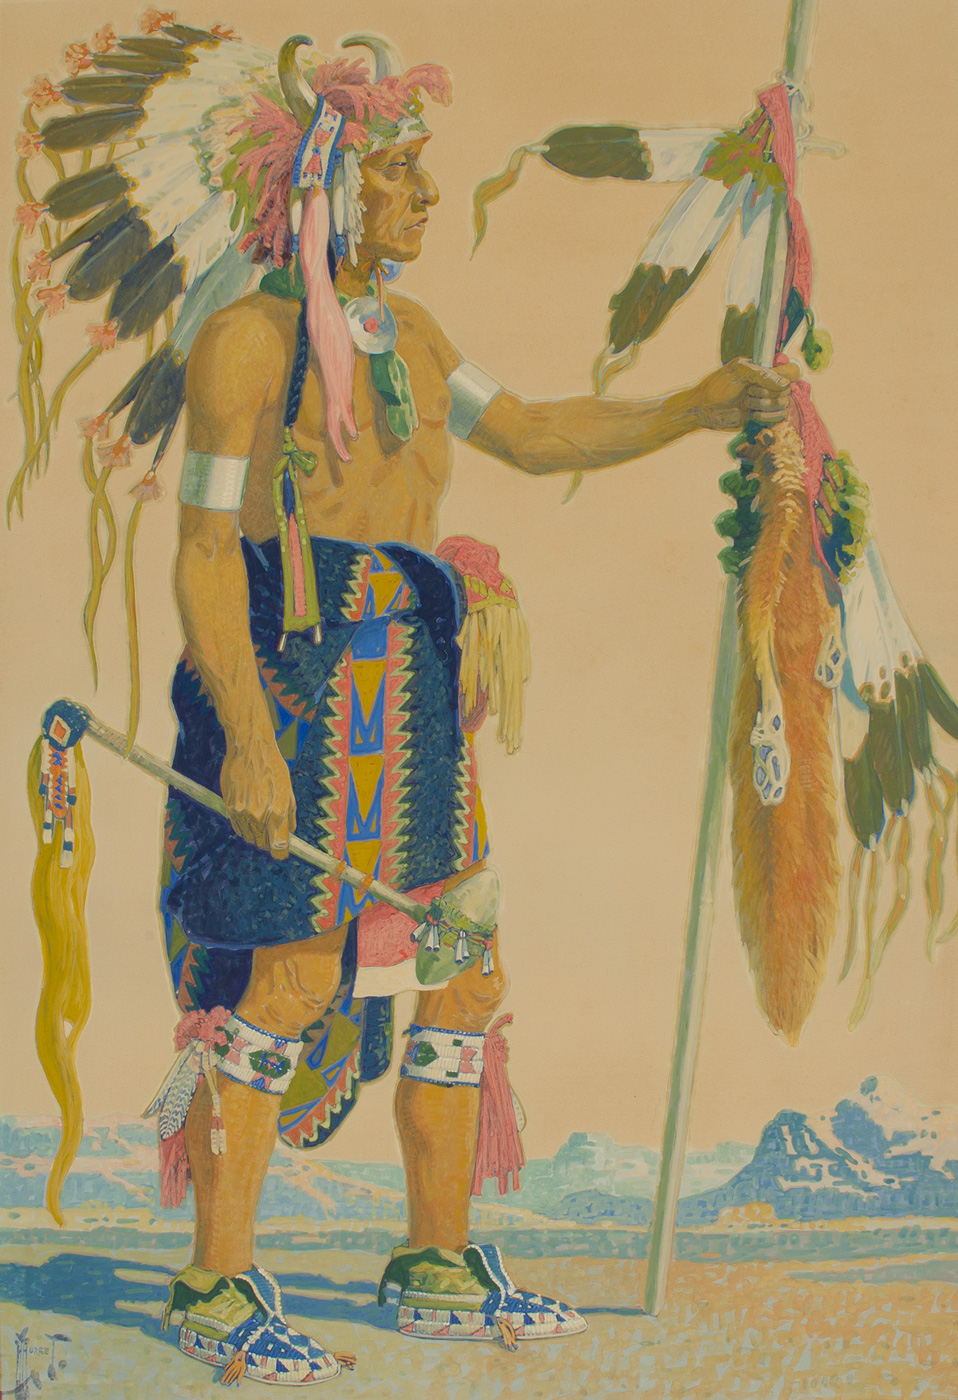 A full length, side view, portrait of an Assiniboine man in tribal clothing.